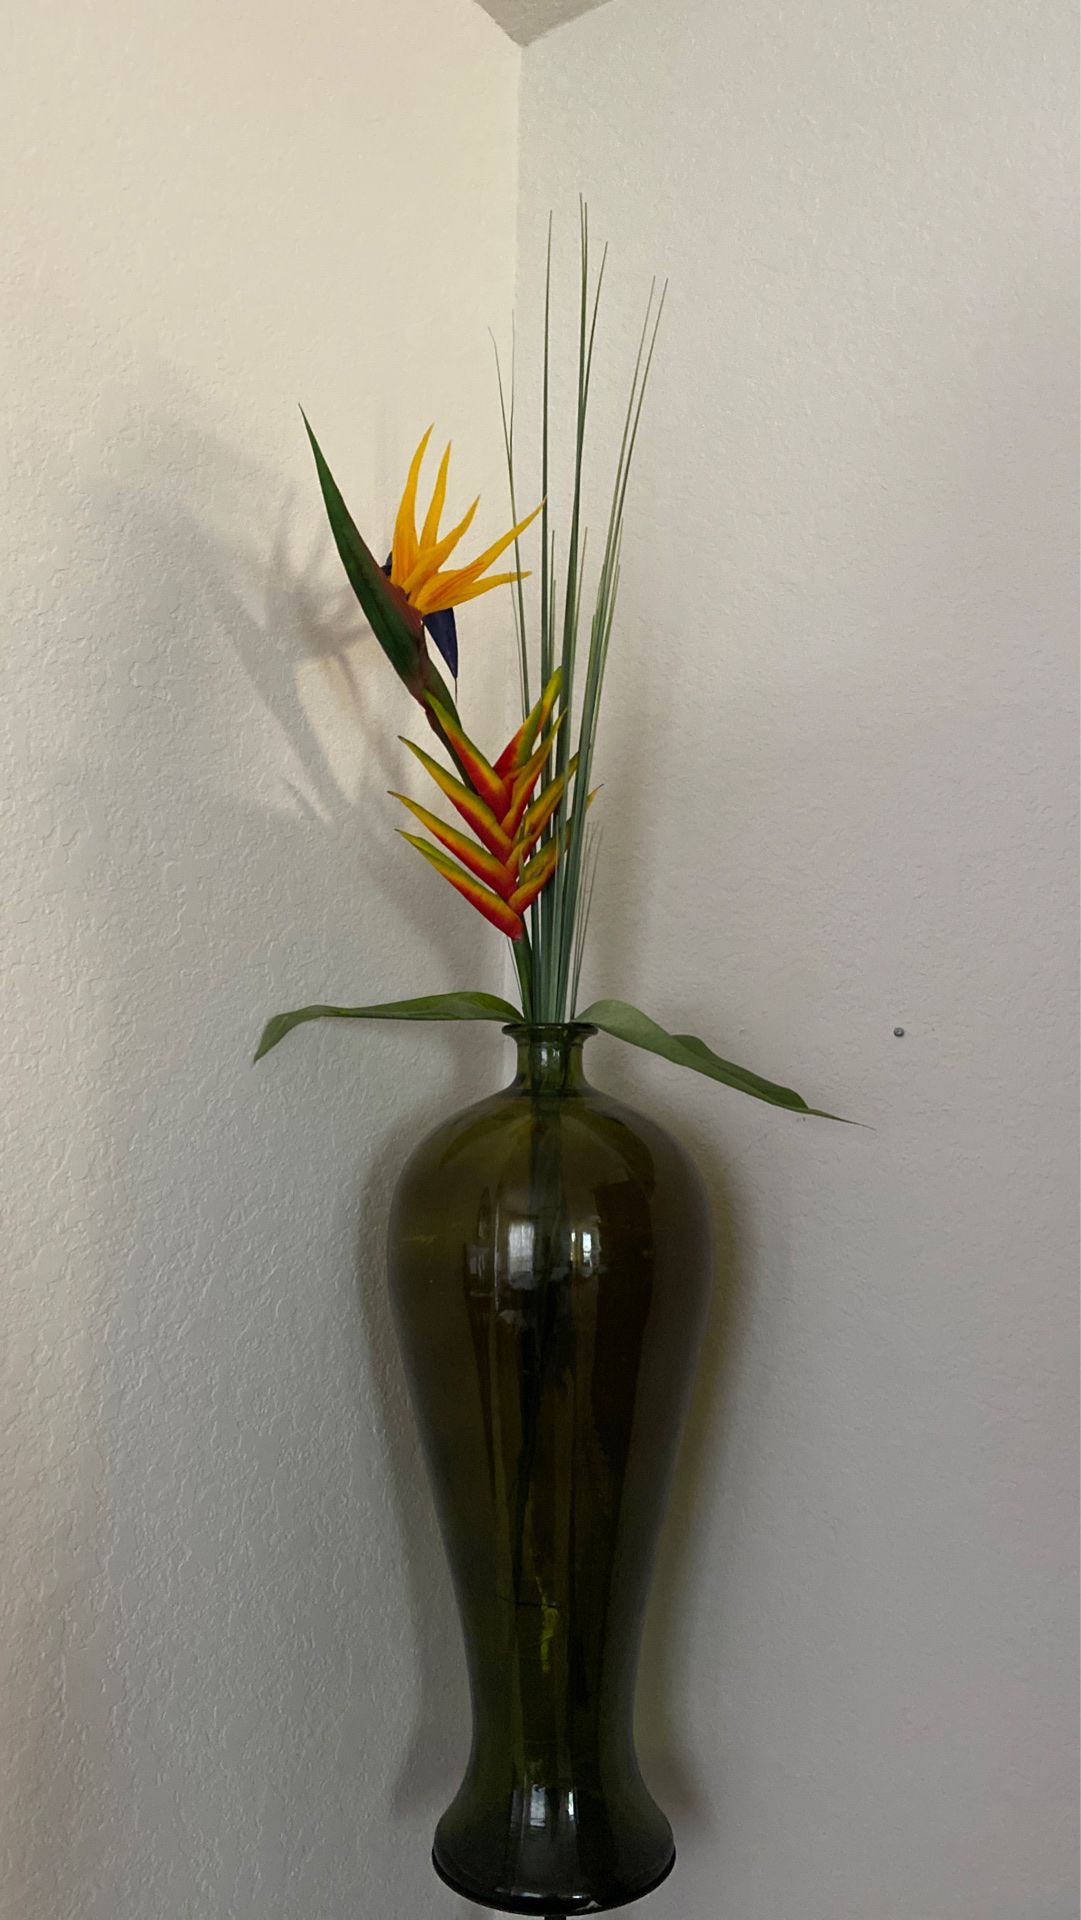 Glass vase with bird of paradise flower